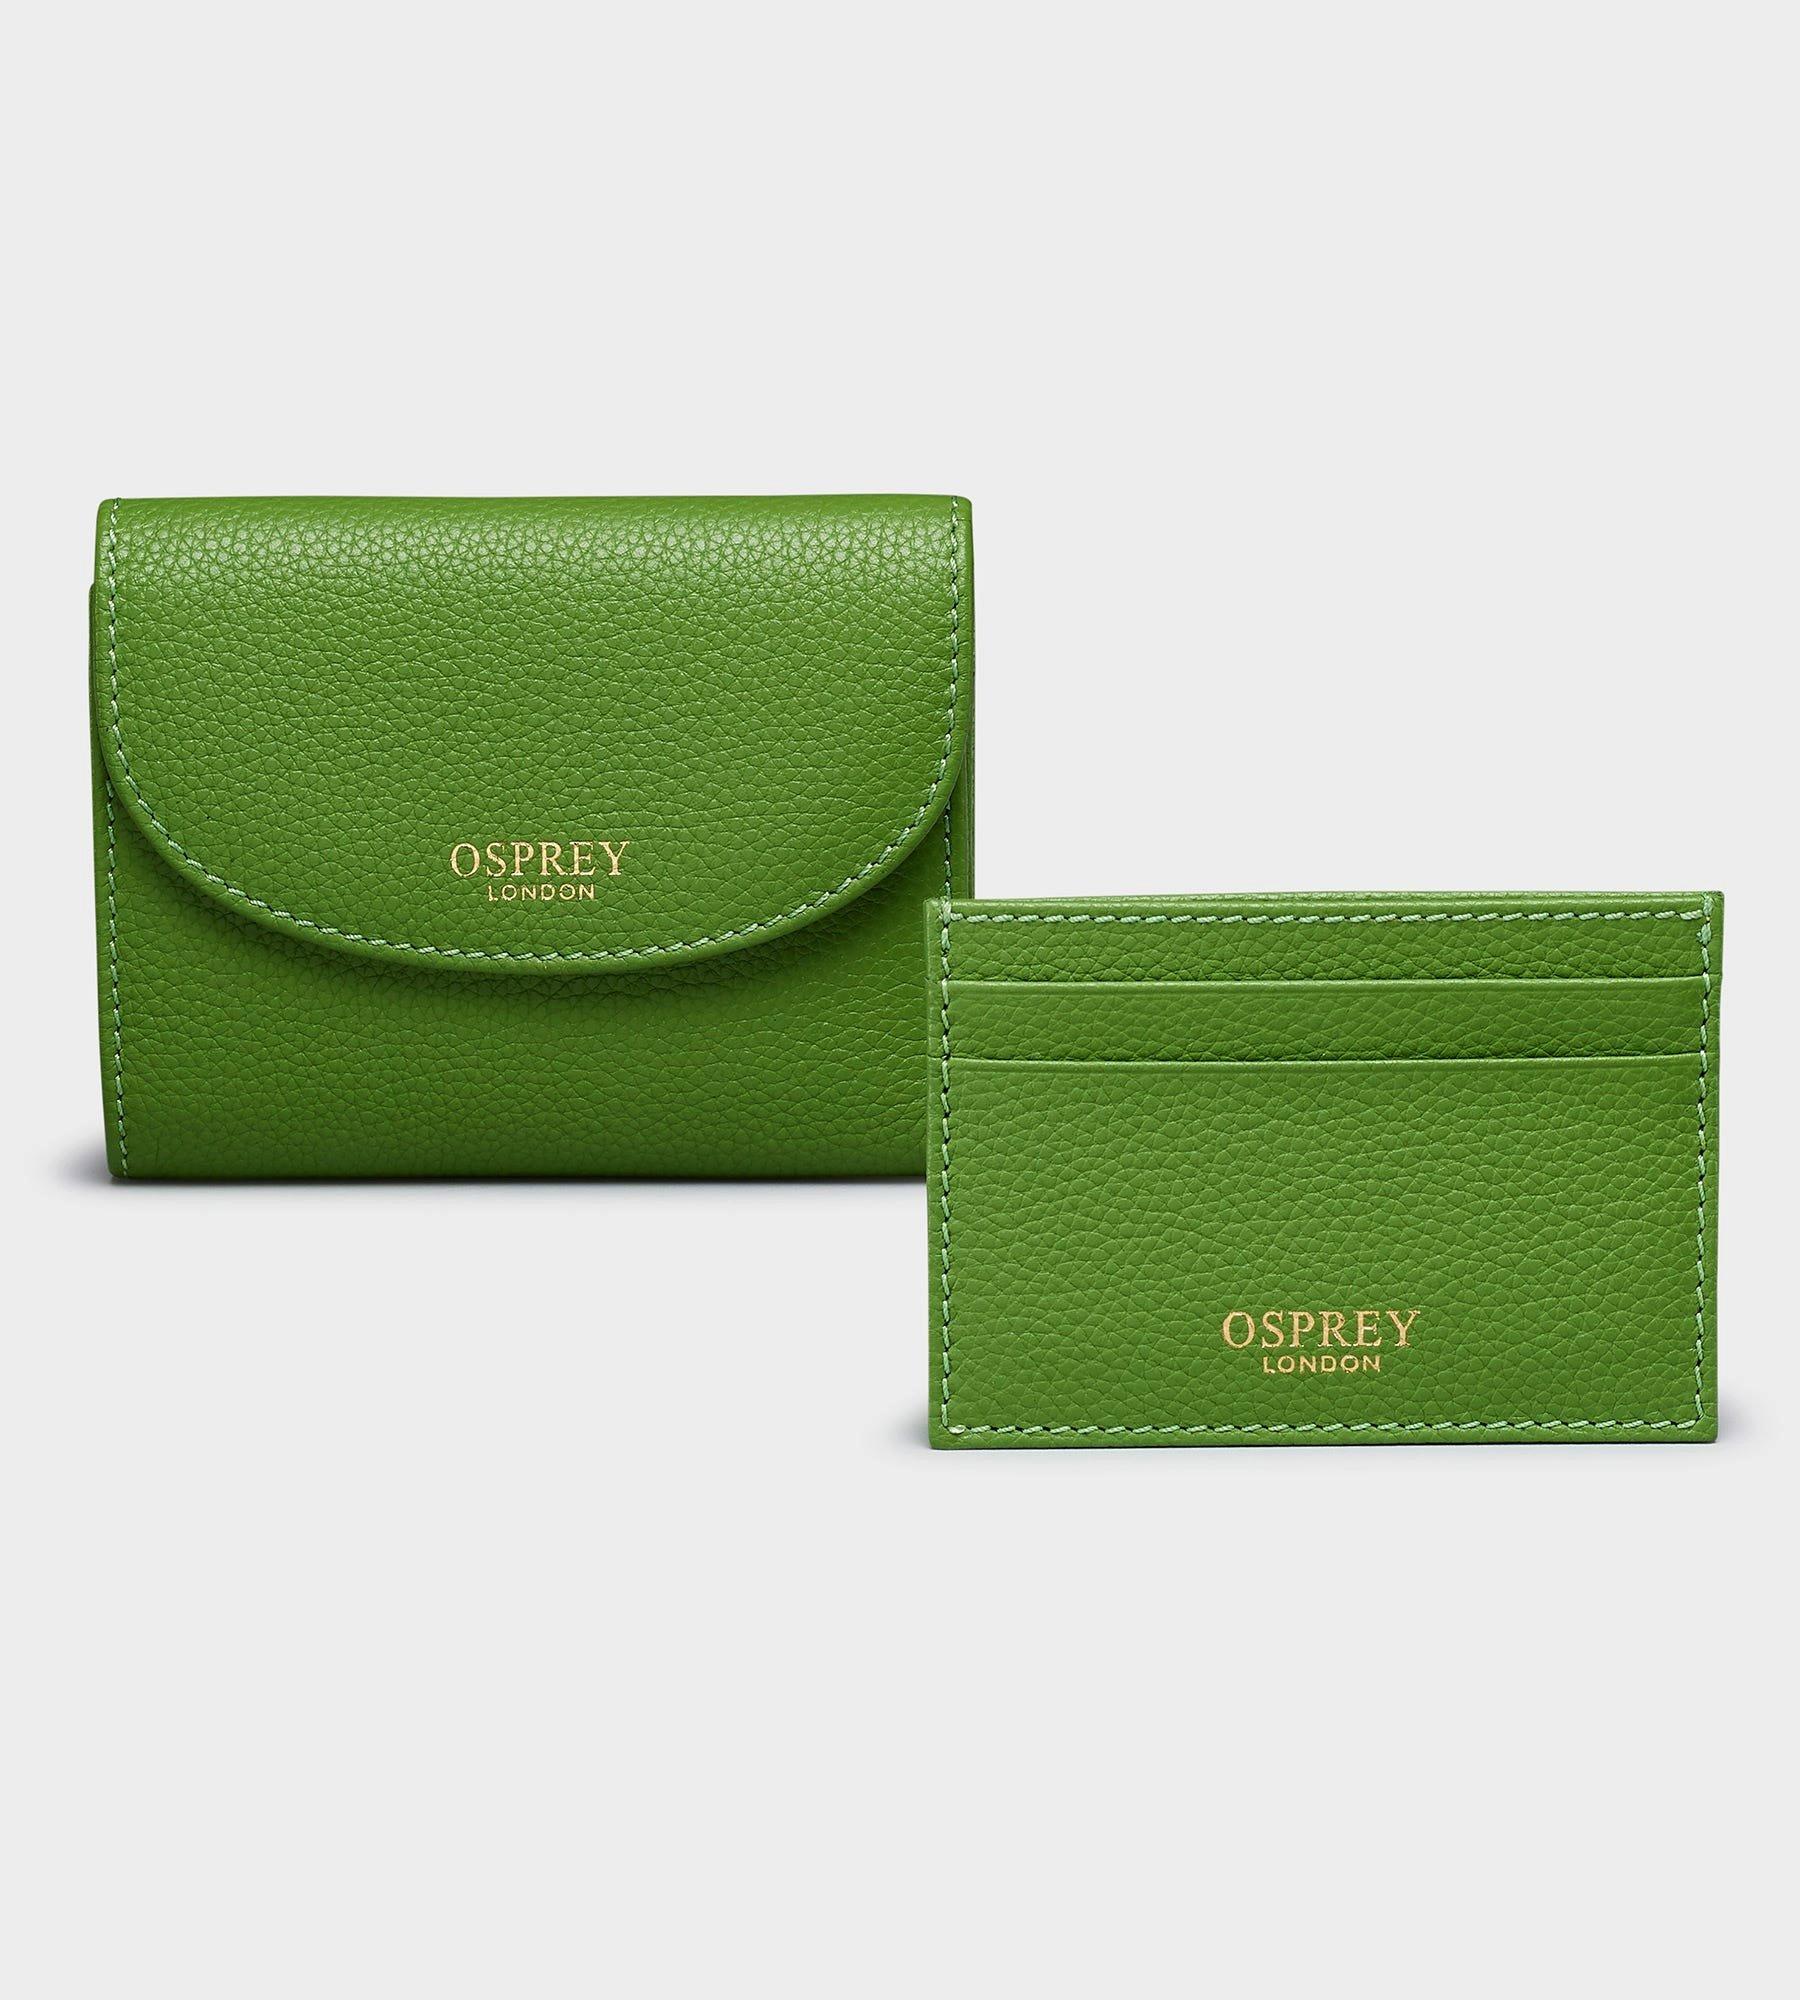 The London Leather Coin Wallet in black | OSPREY LONDON